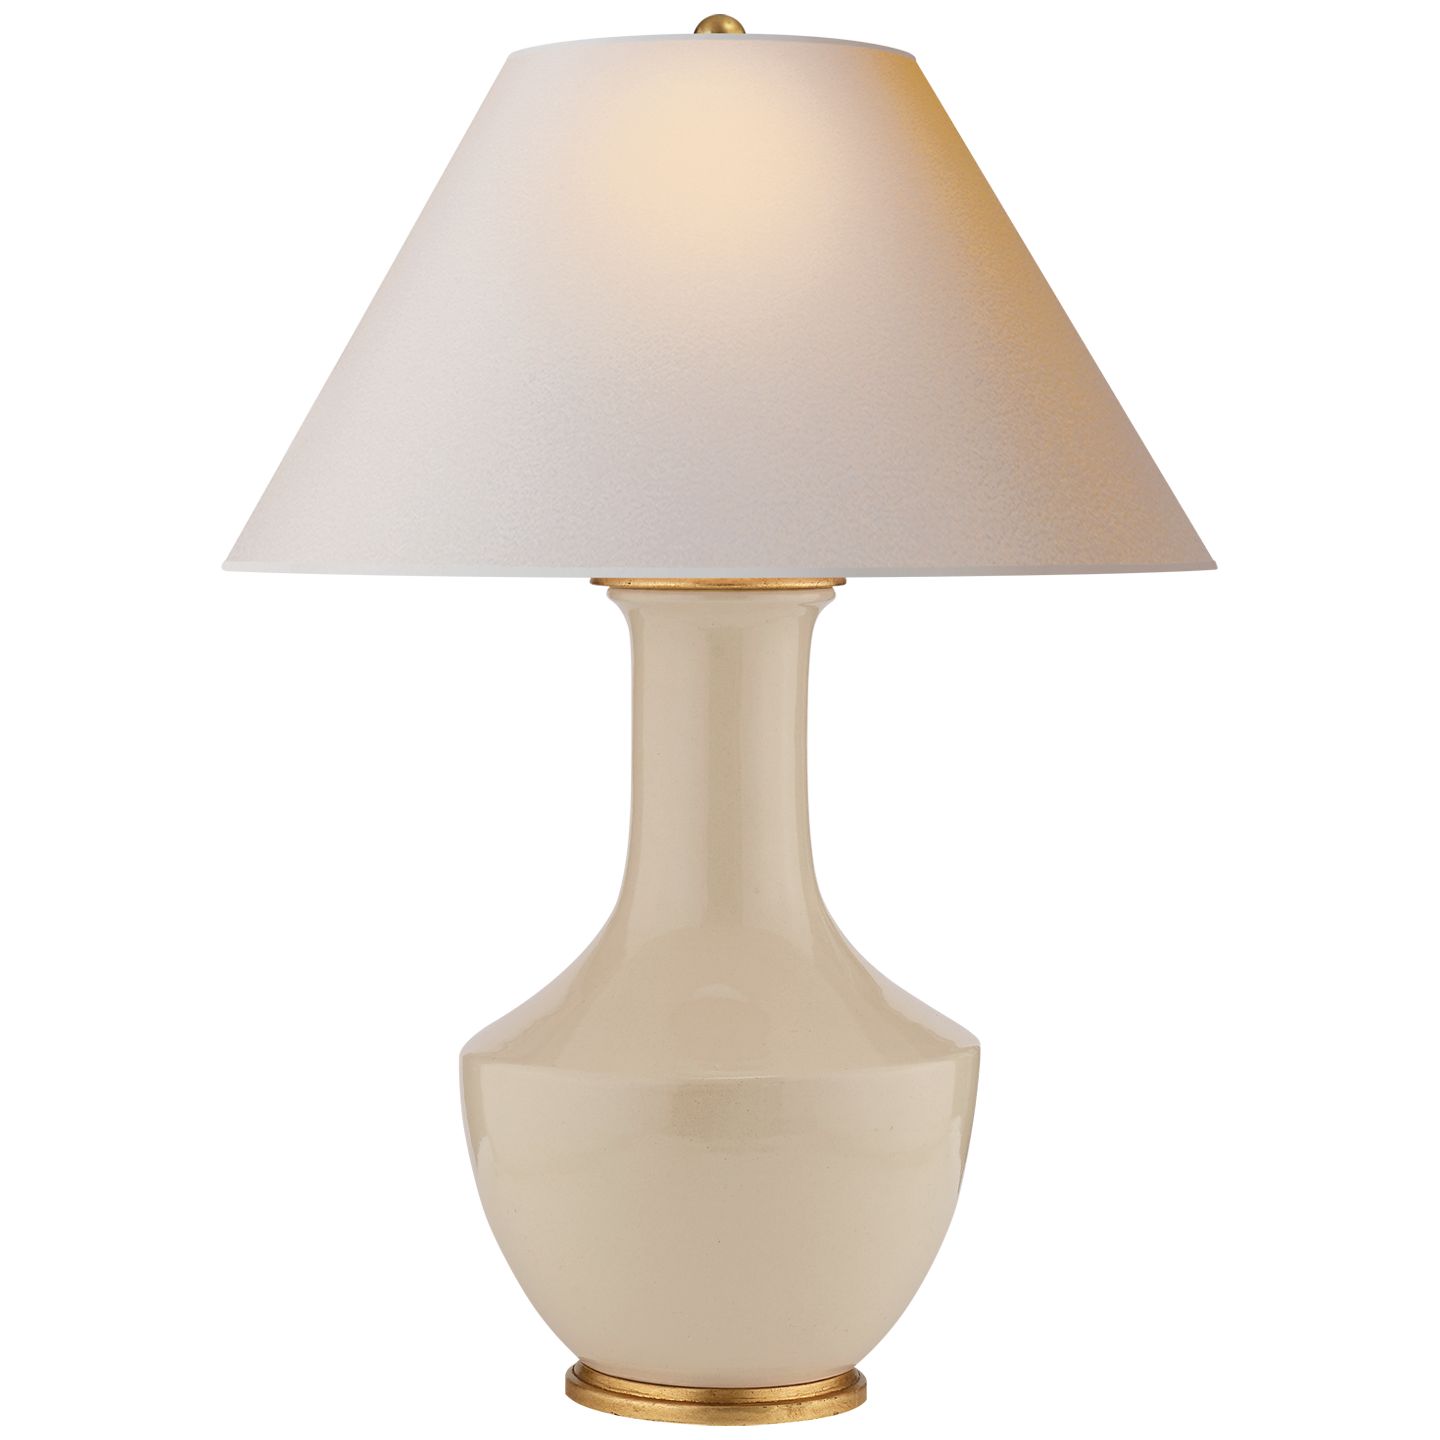 Lambay Table Lamp in Coconut with Natural Paper Shade | Visual Comfort